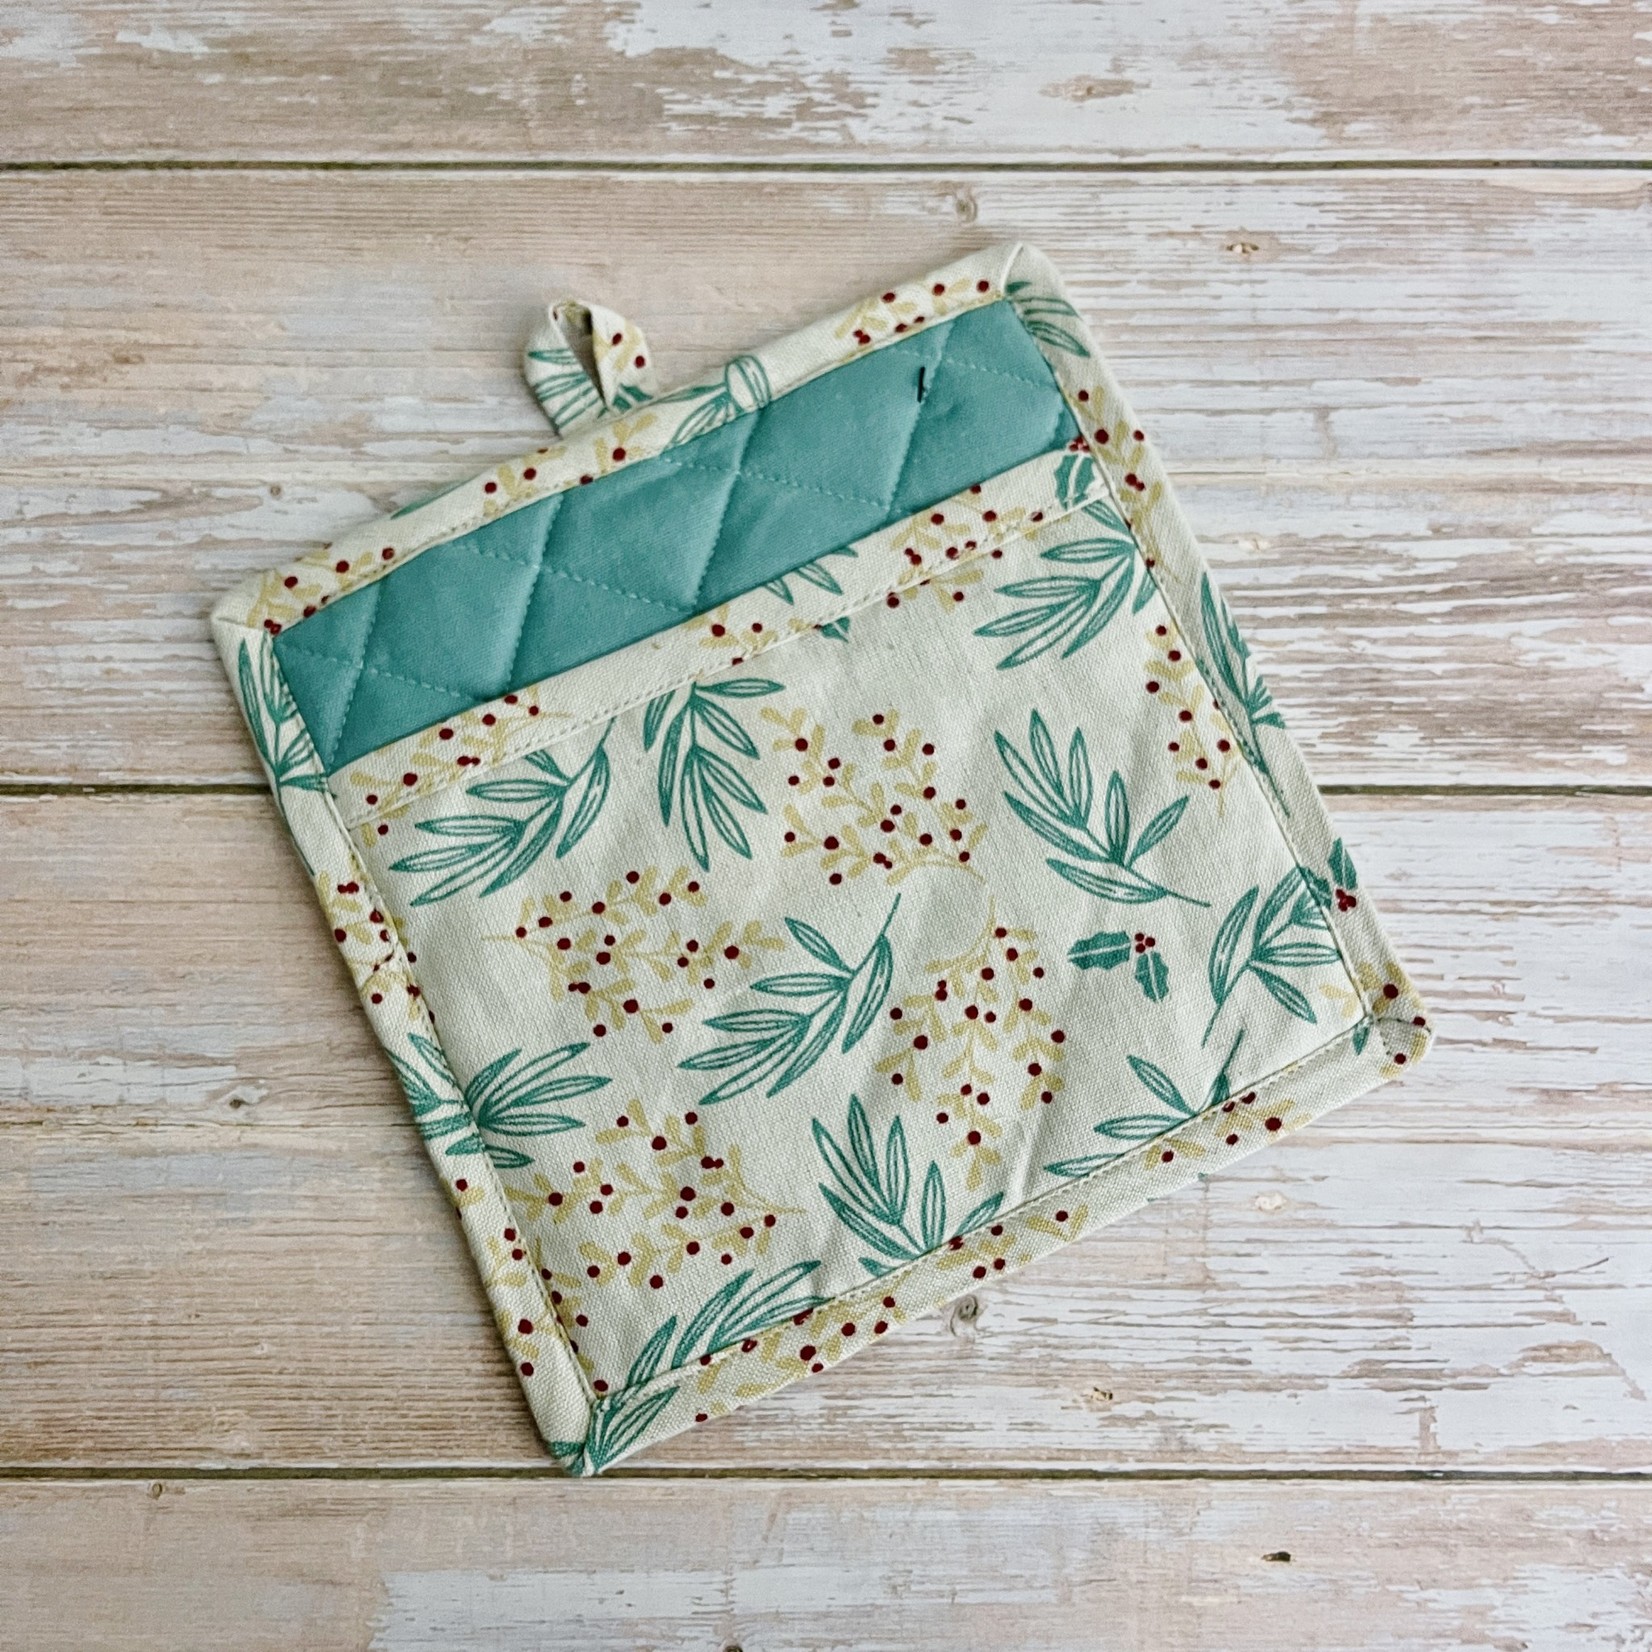 8" Sq Cotton  Printed Pot Holder with Floral Pattern